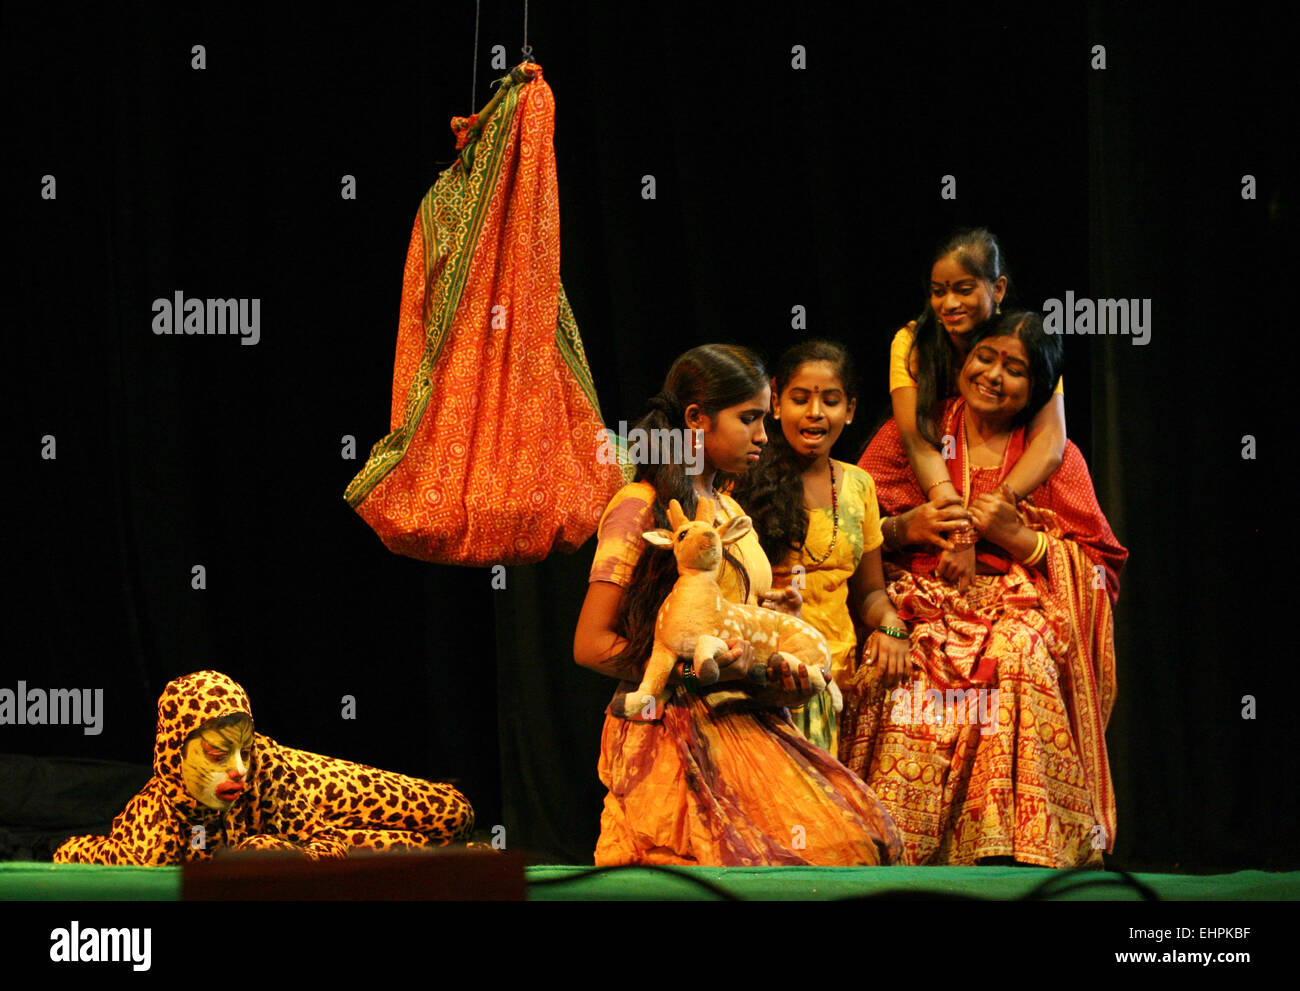 Artists of Komali Kalasamithi perform Atma Geetham with conservation of nature theme on October 27,2012 in Hyderabad,India. Stock Photo